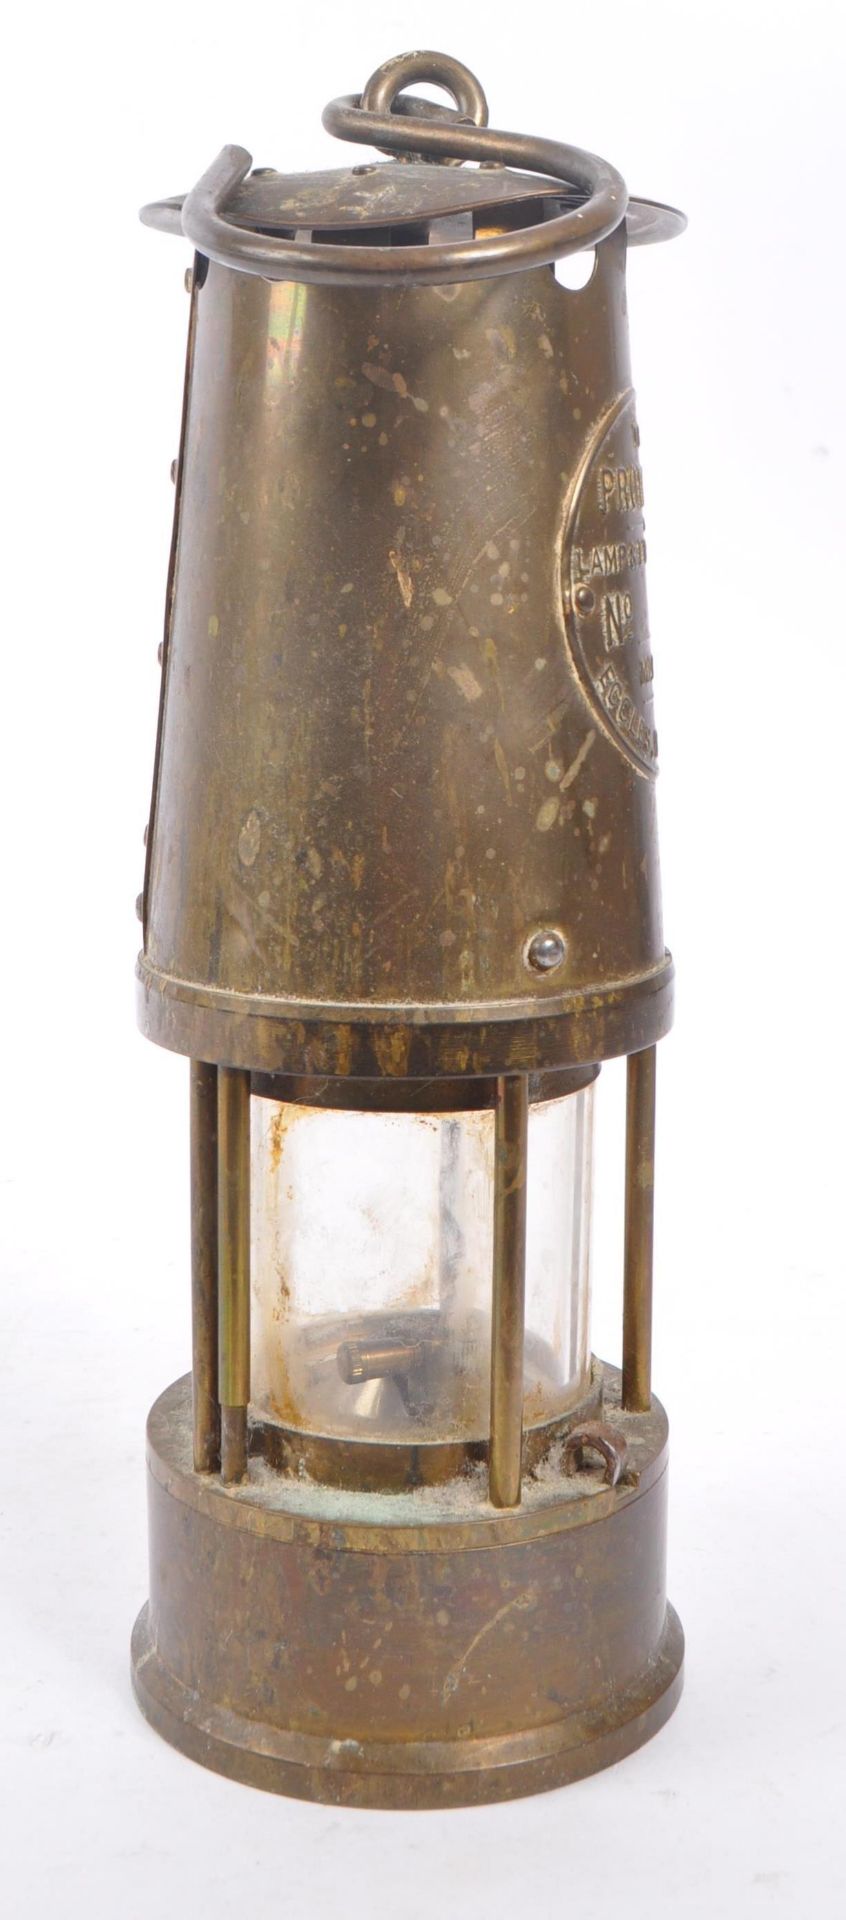 THE PROTECTOR LAMP & LIGHTING - BRASS MINERS LAMP - Image 4 of 6